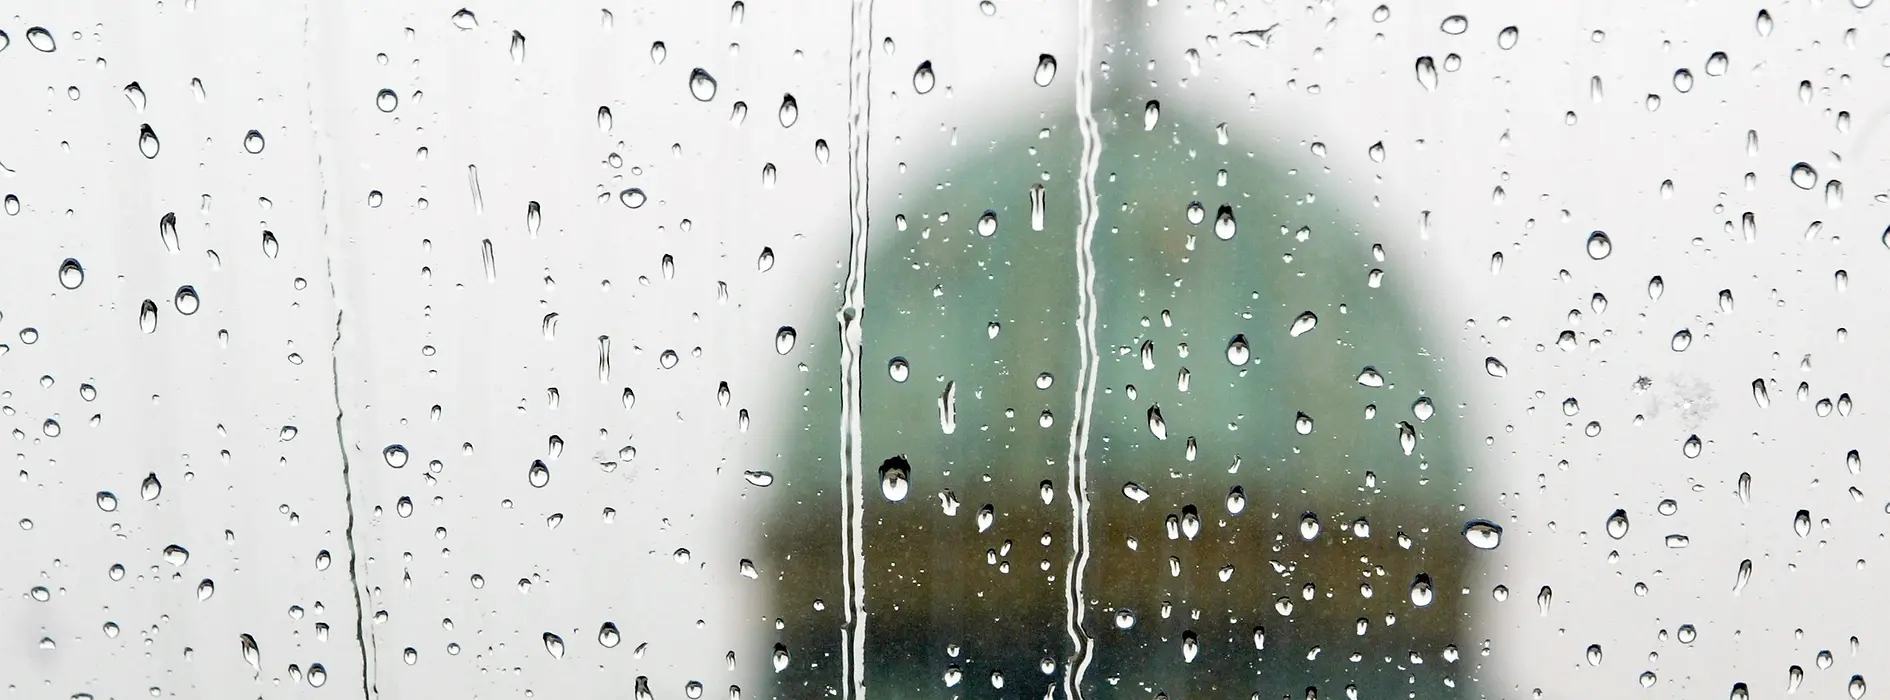 View through a window covered in raindrops